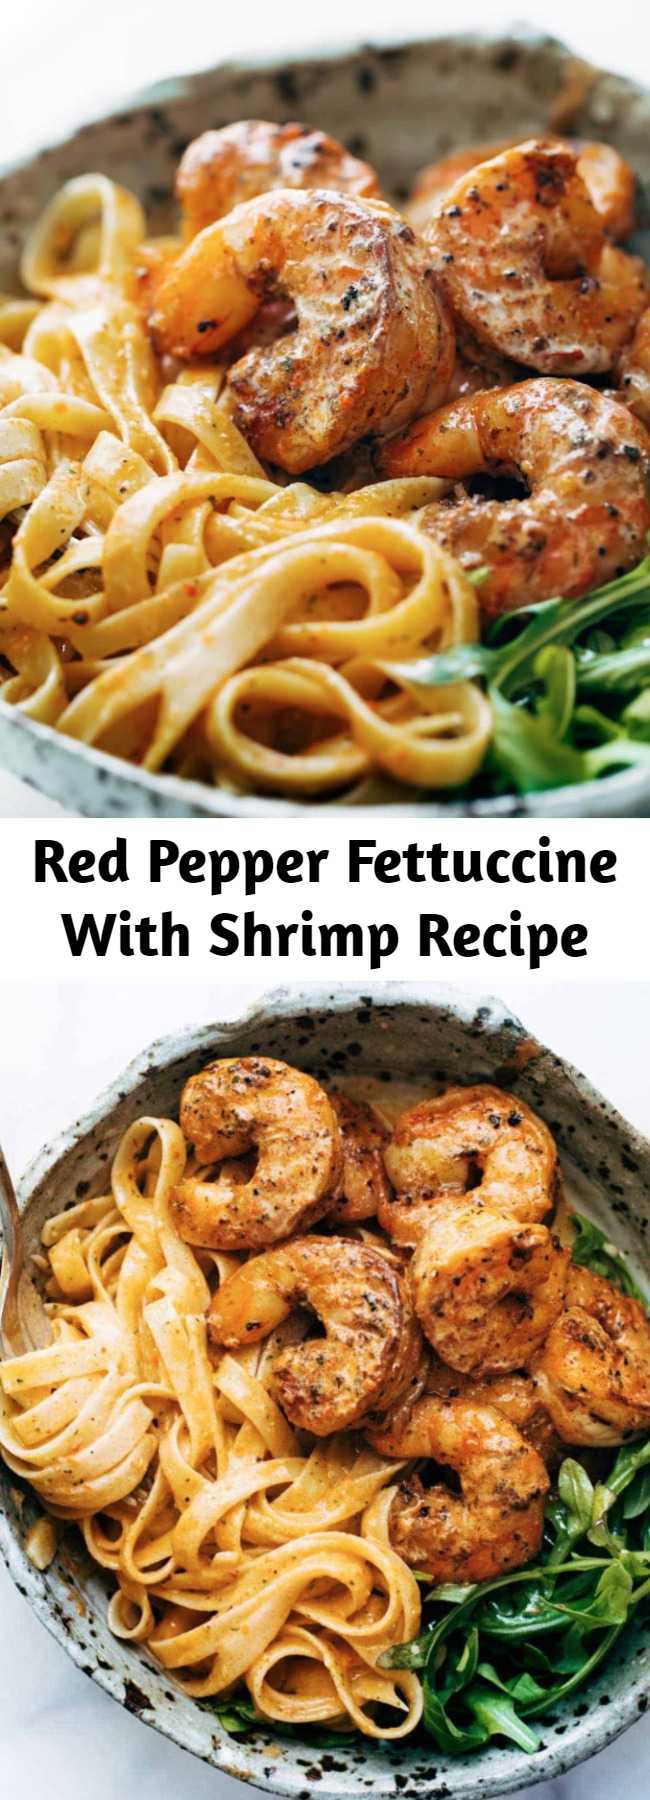 Red Pepper Fettuccine With Shrimp Recipe - Red Pepper Fettuccine with Shrimp! It’s got quick, pan-fried shrimp, creamy noodles, and red pepper / garlic / butter / lemon-ish sauce vibes. Perfect quick and easy dinner!